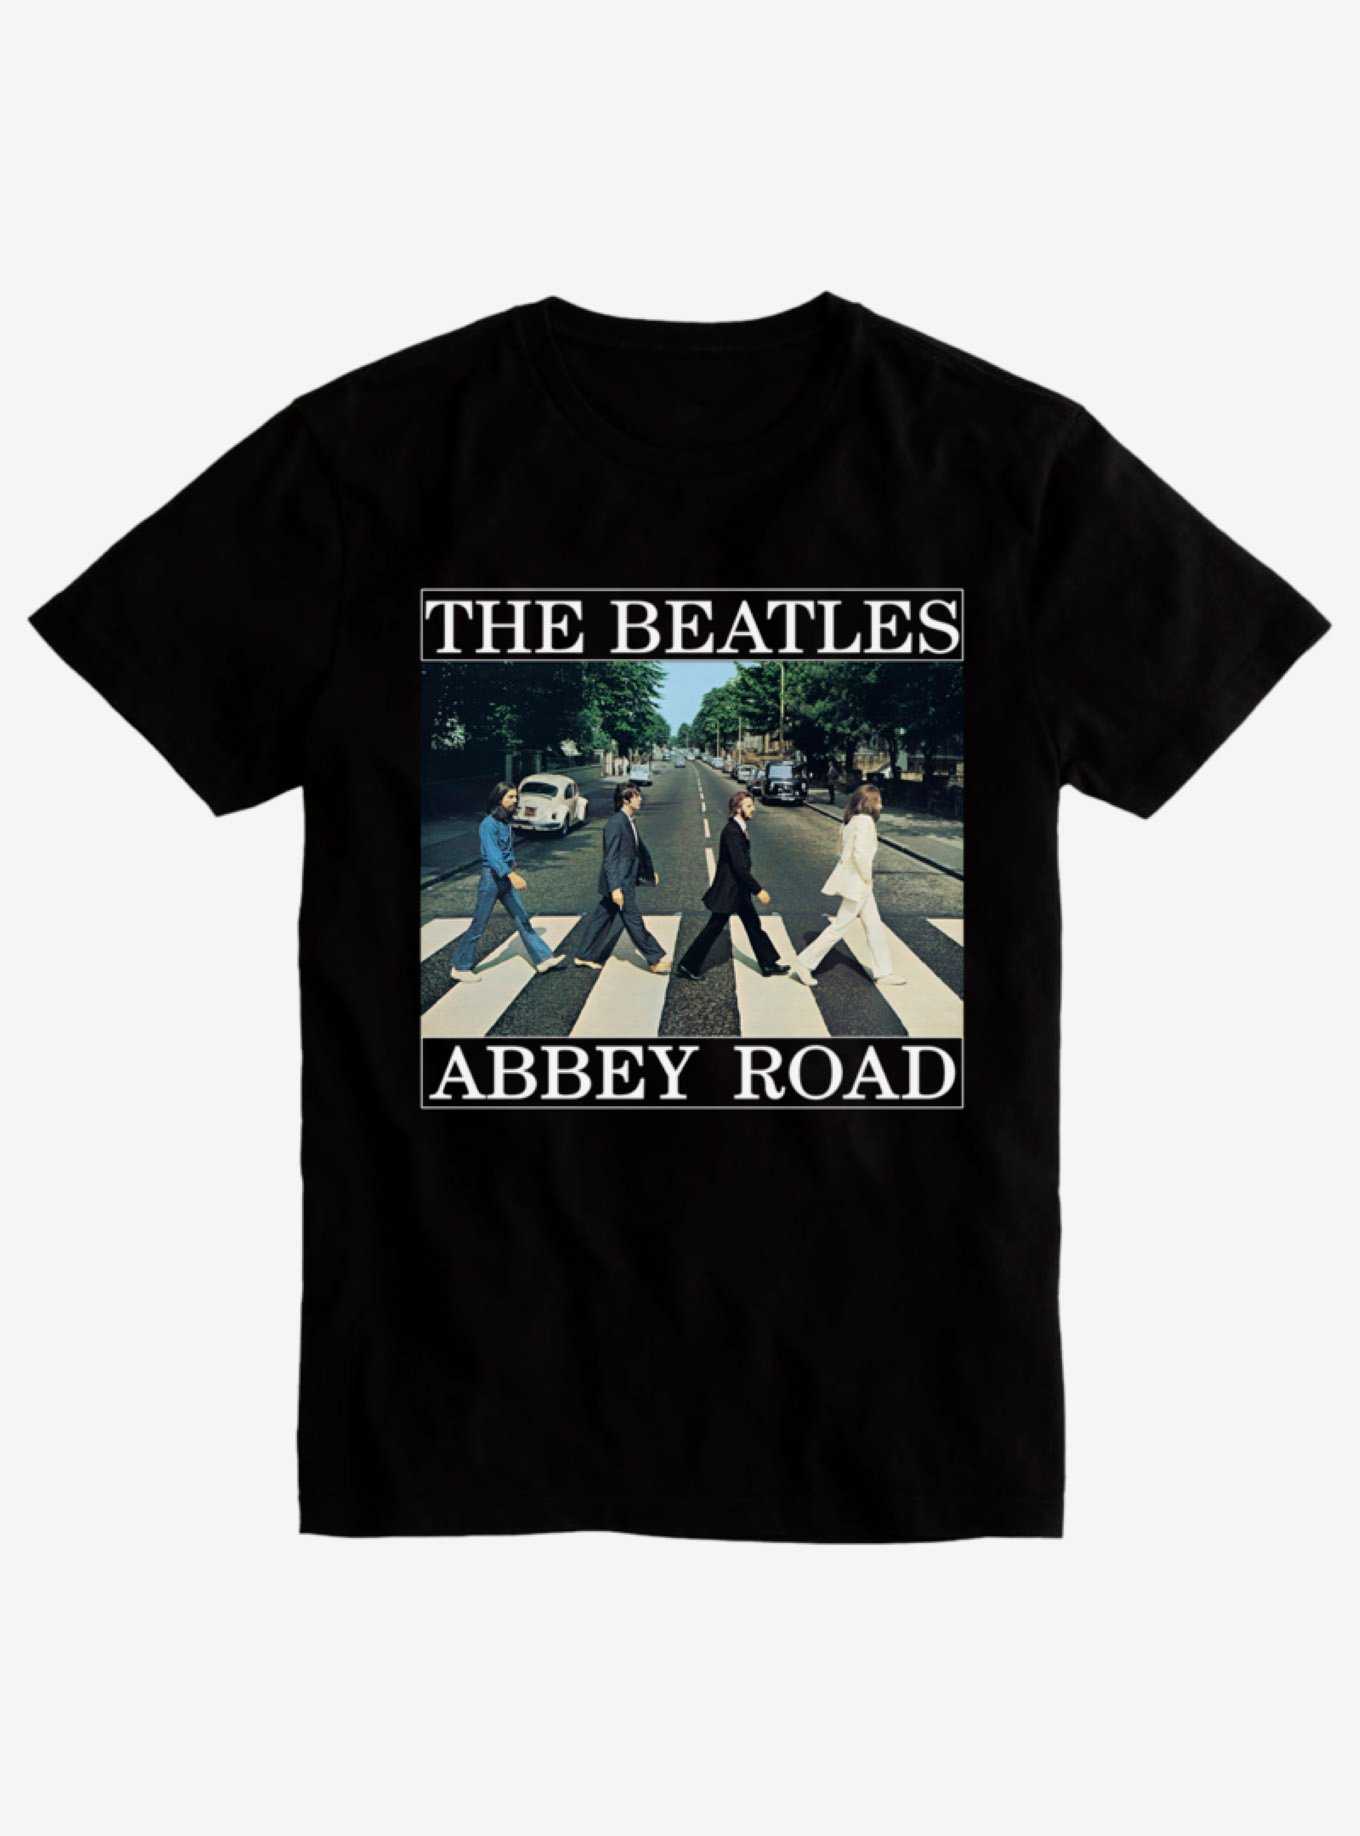 The Beatles Abbey Road Album | Cover T-Shirt Hot Topic